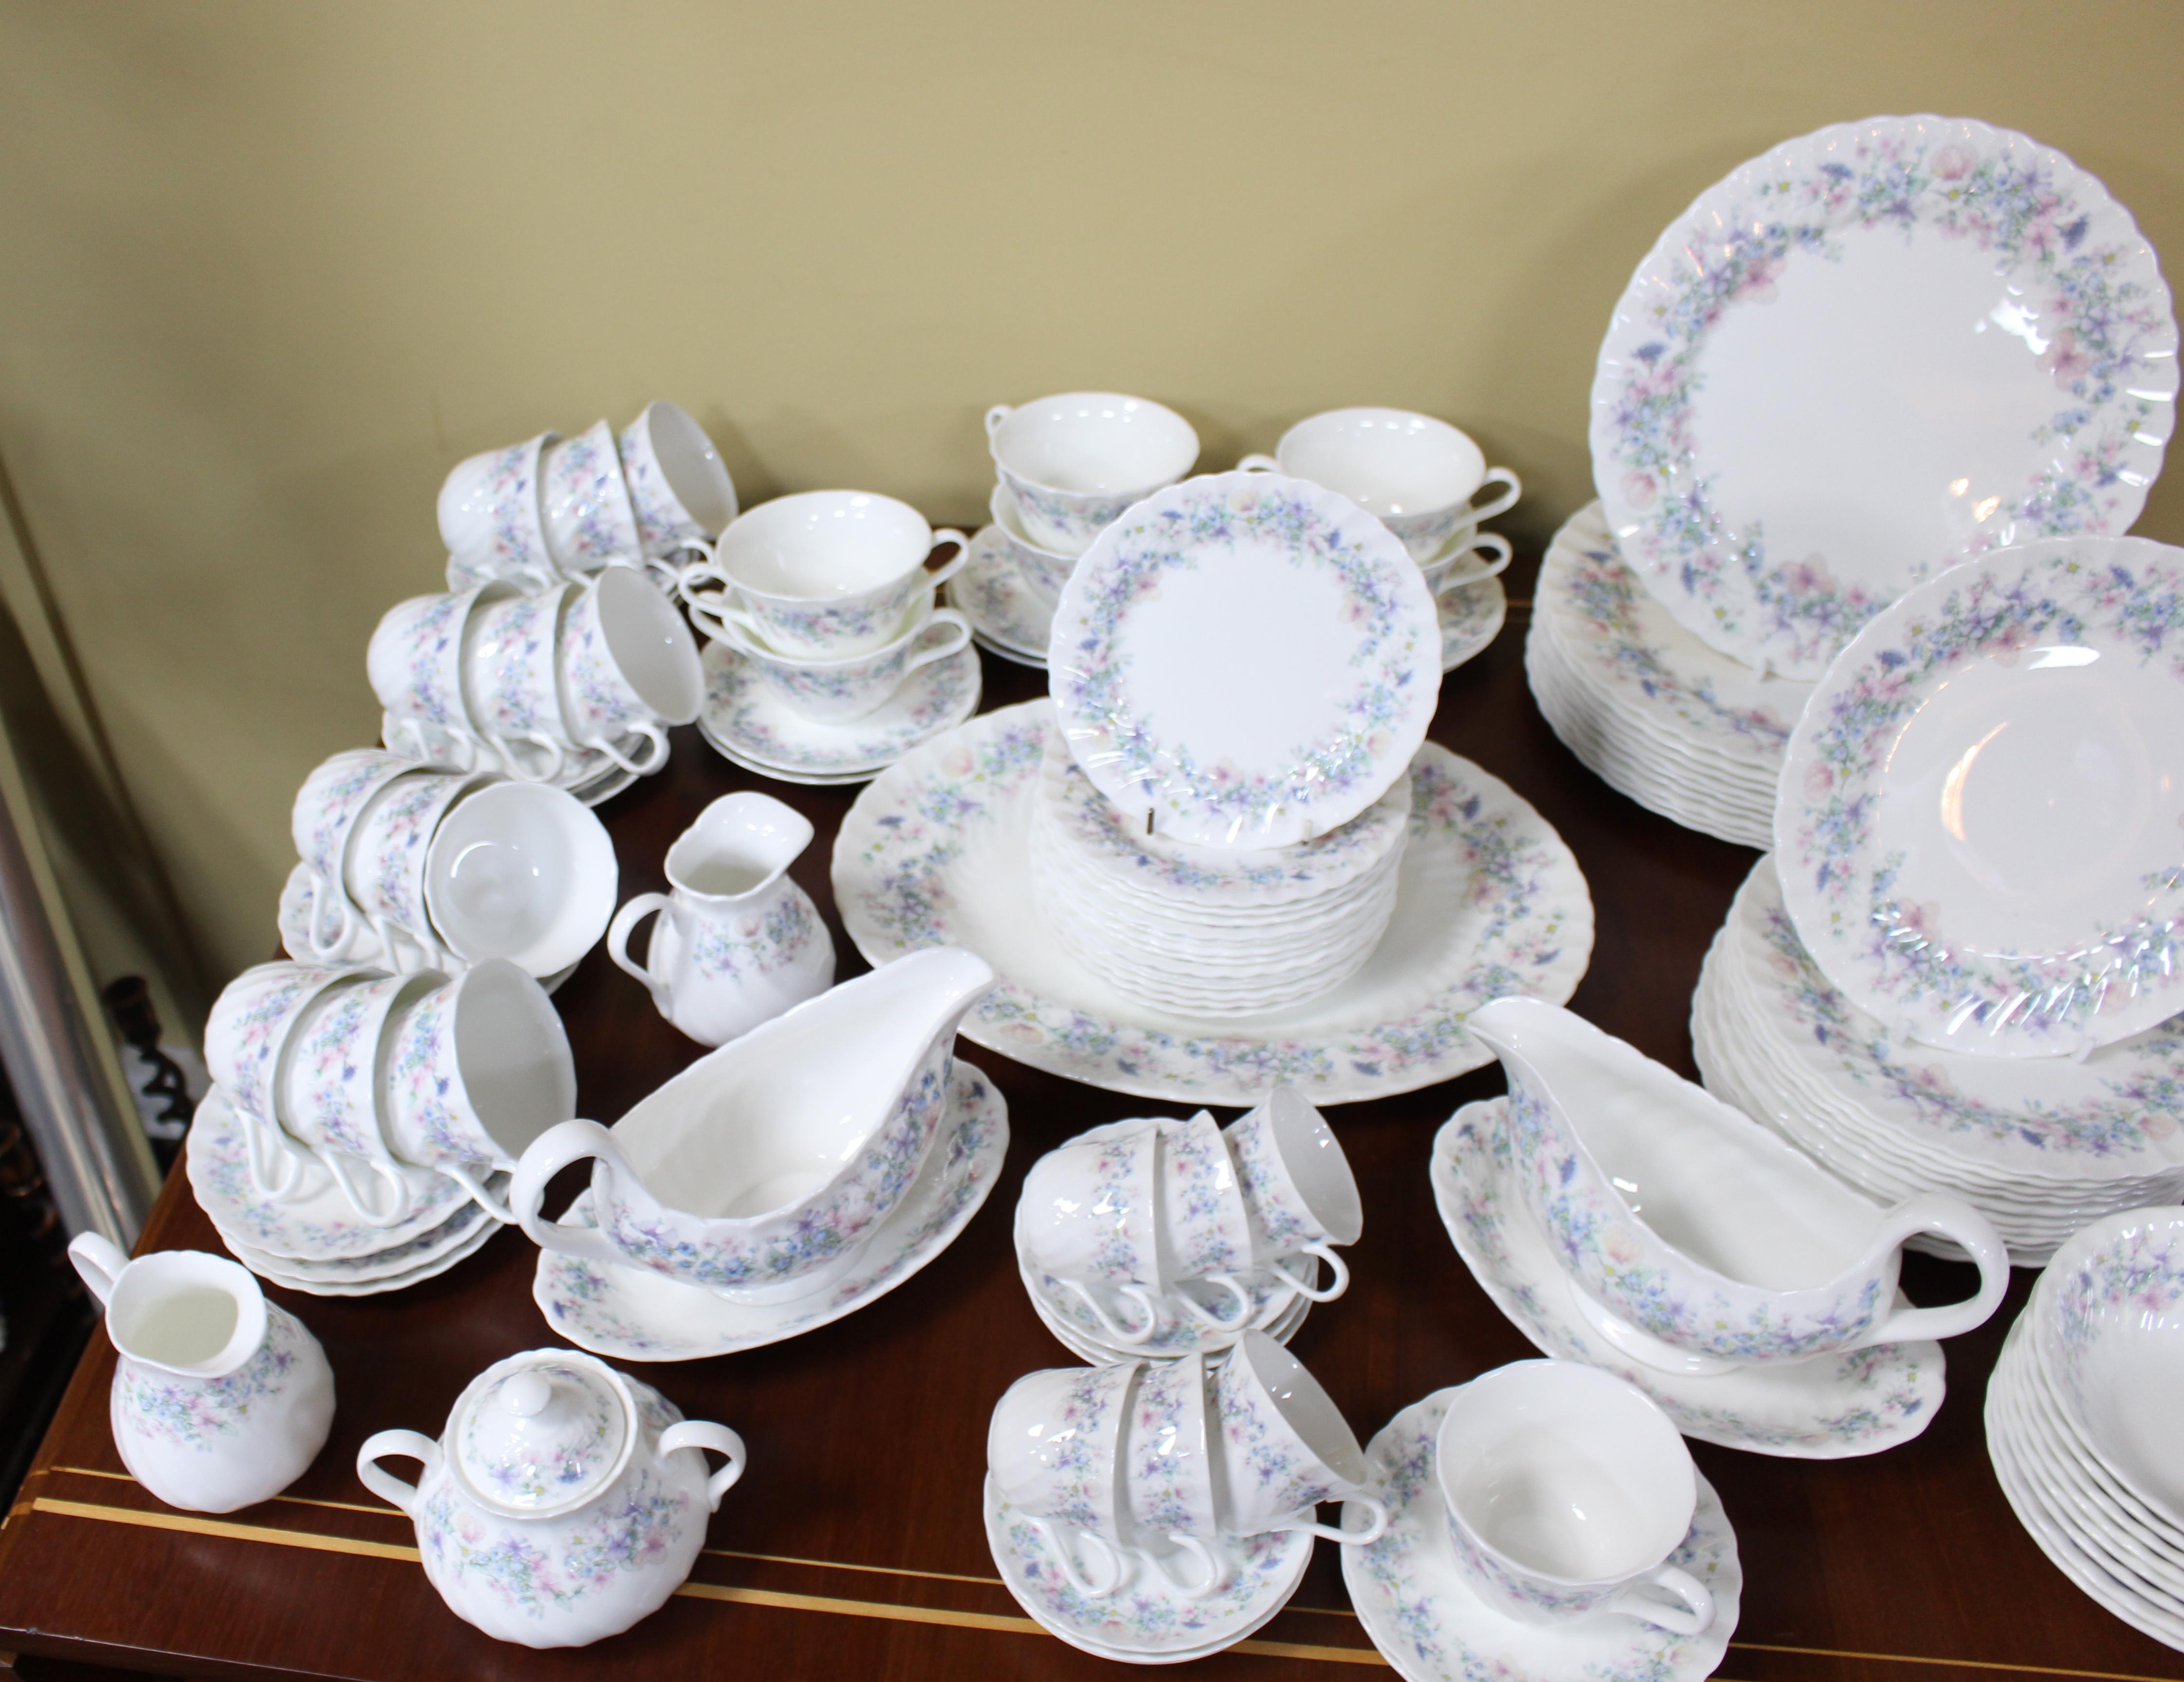 Manufacturer Wedgwood, made in England
Pattern W
Pieces 104
Pieces Everything pictured - 10 x 11 inch dinner plates, 12 x 8 1/2 inch side plates, 14 x 6 3/4 inch tea plates, large oval serving platter, 2 x sauce boats on stands, 6 x soup coupes